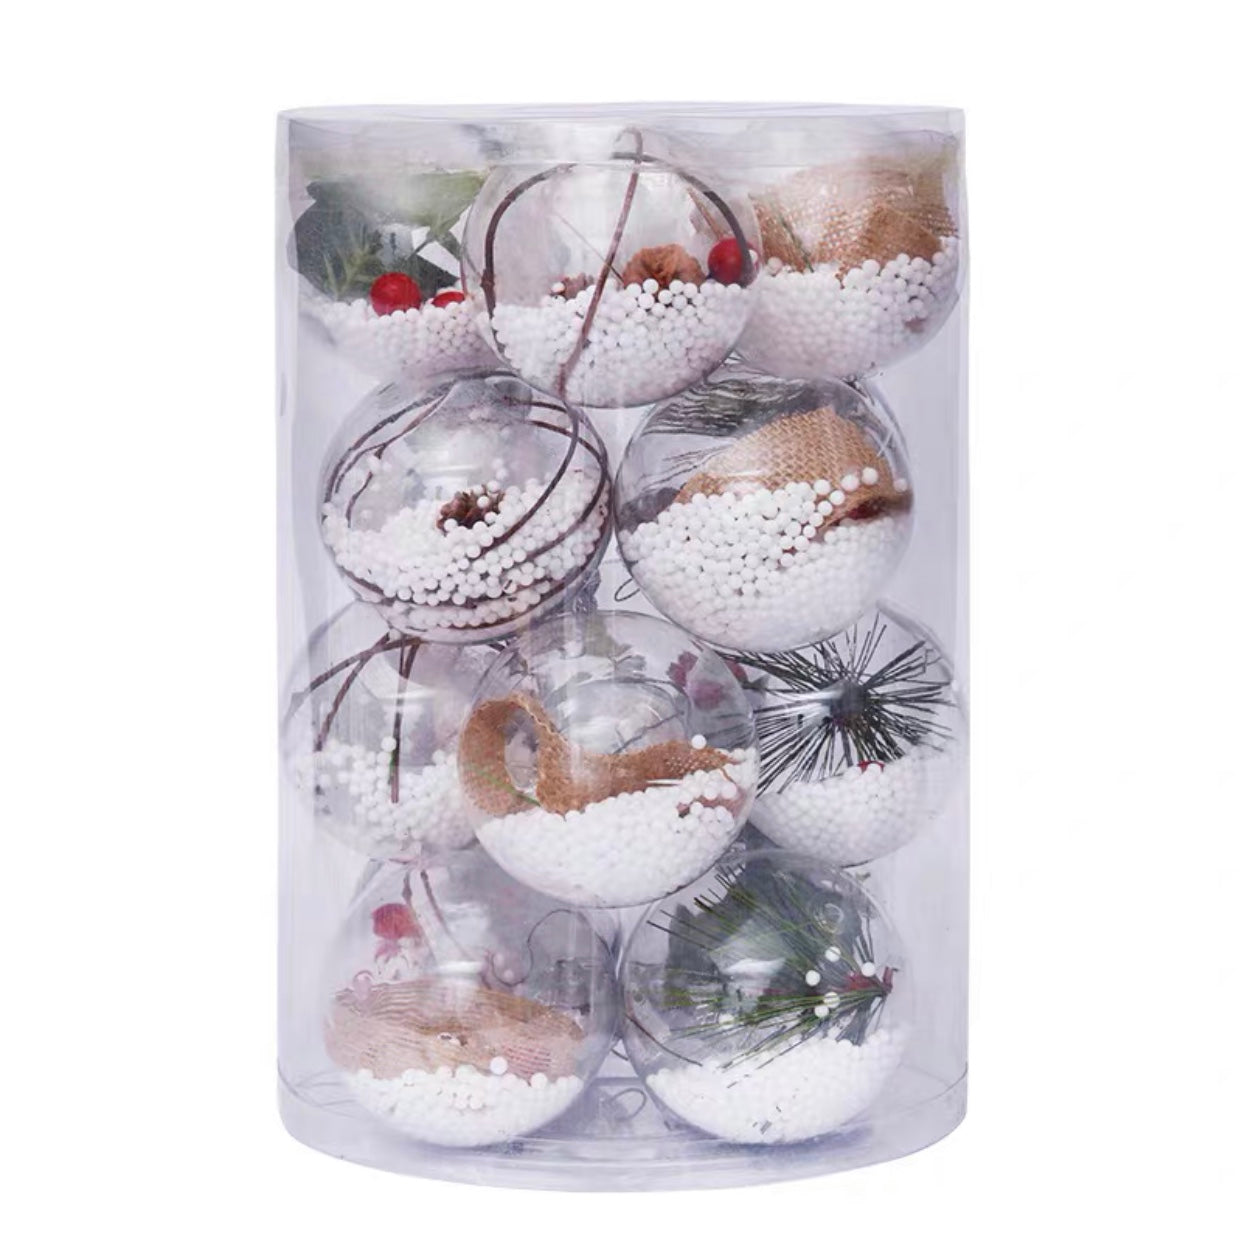 Red Holly fruit and Snow Baubles - Set of 16